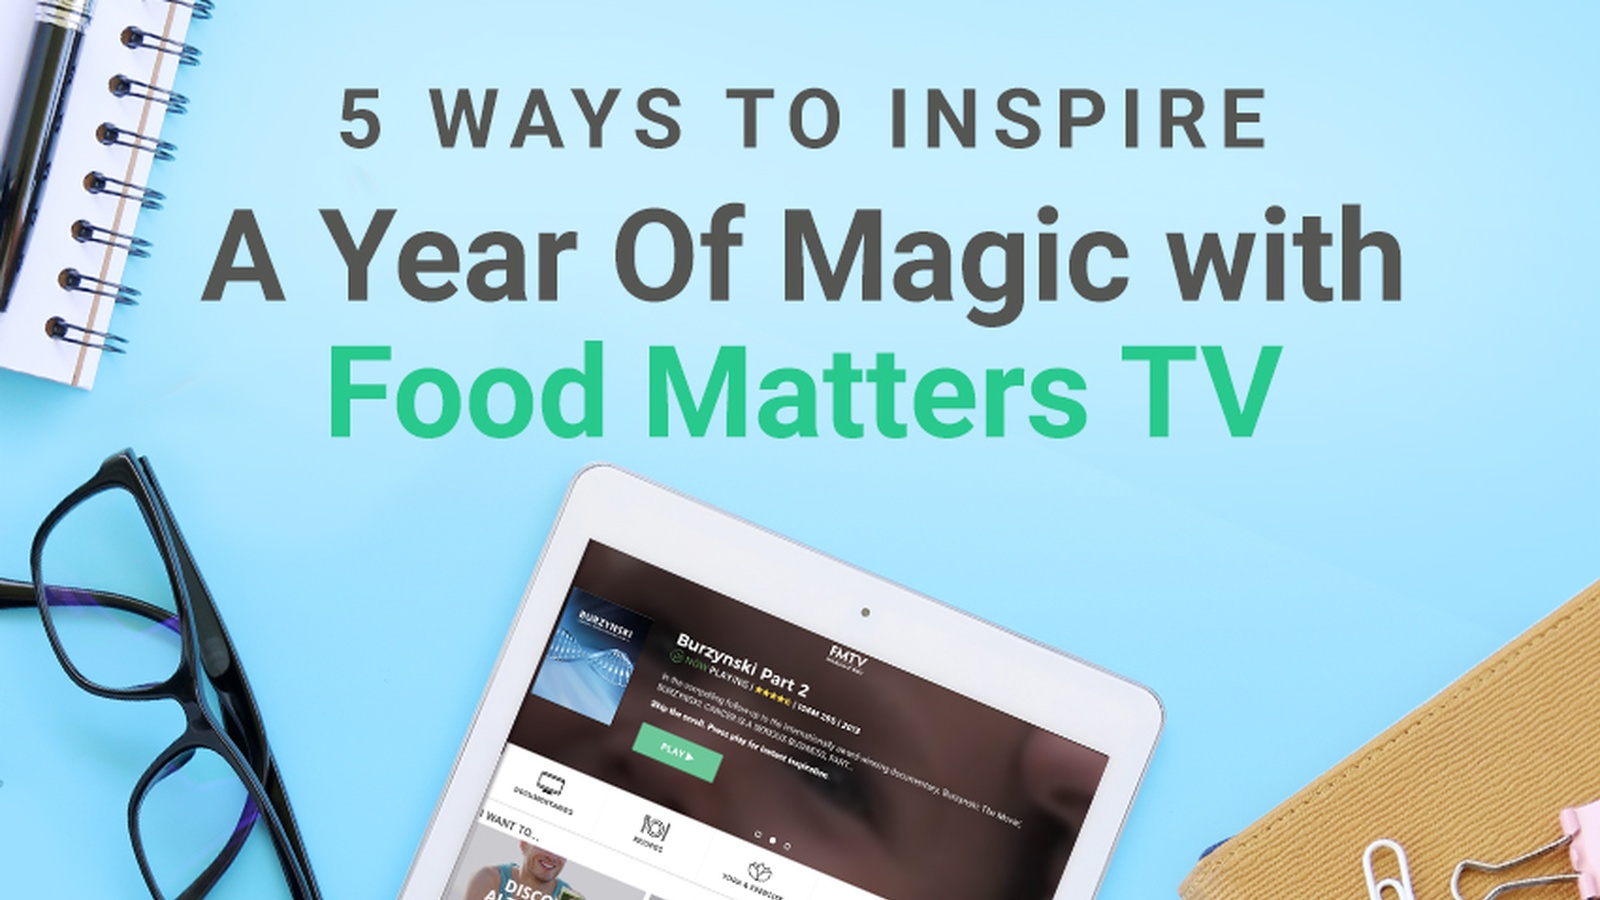 5 Ways To Inspire A Year Of Magic With Food Matters TV